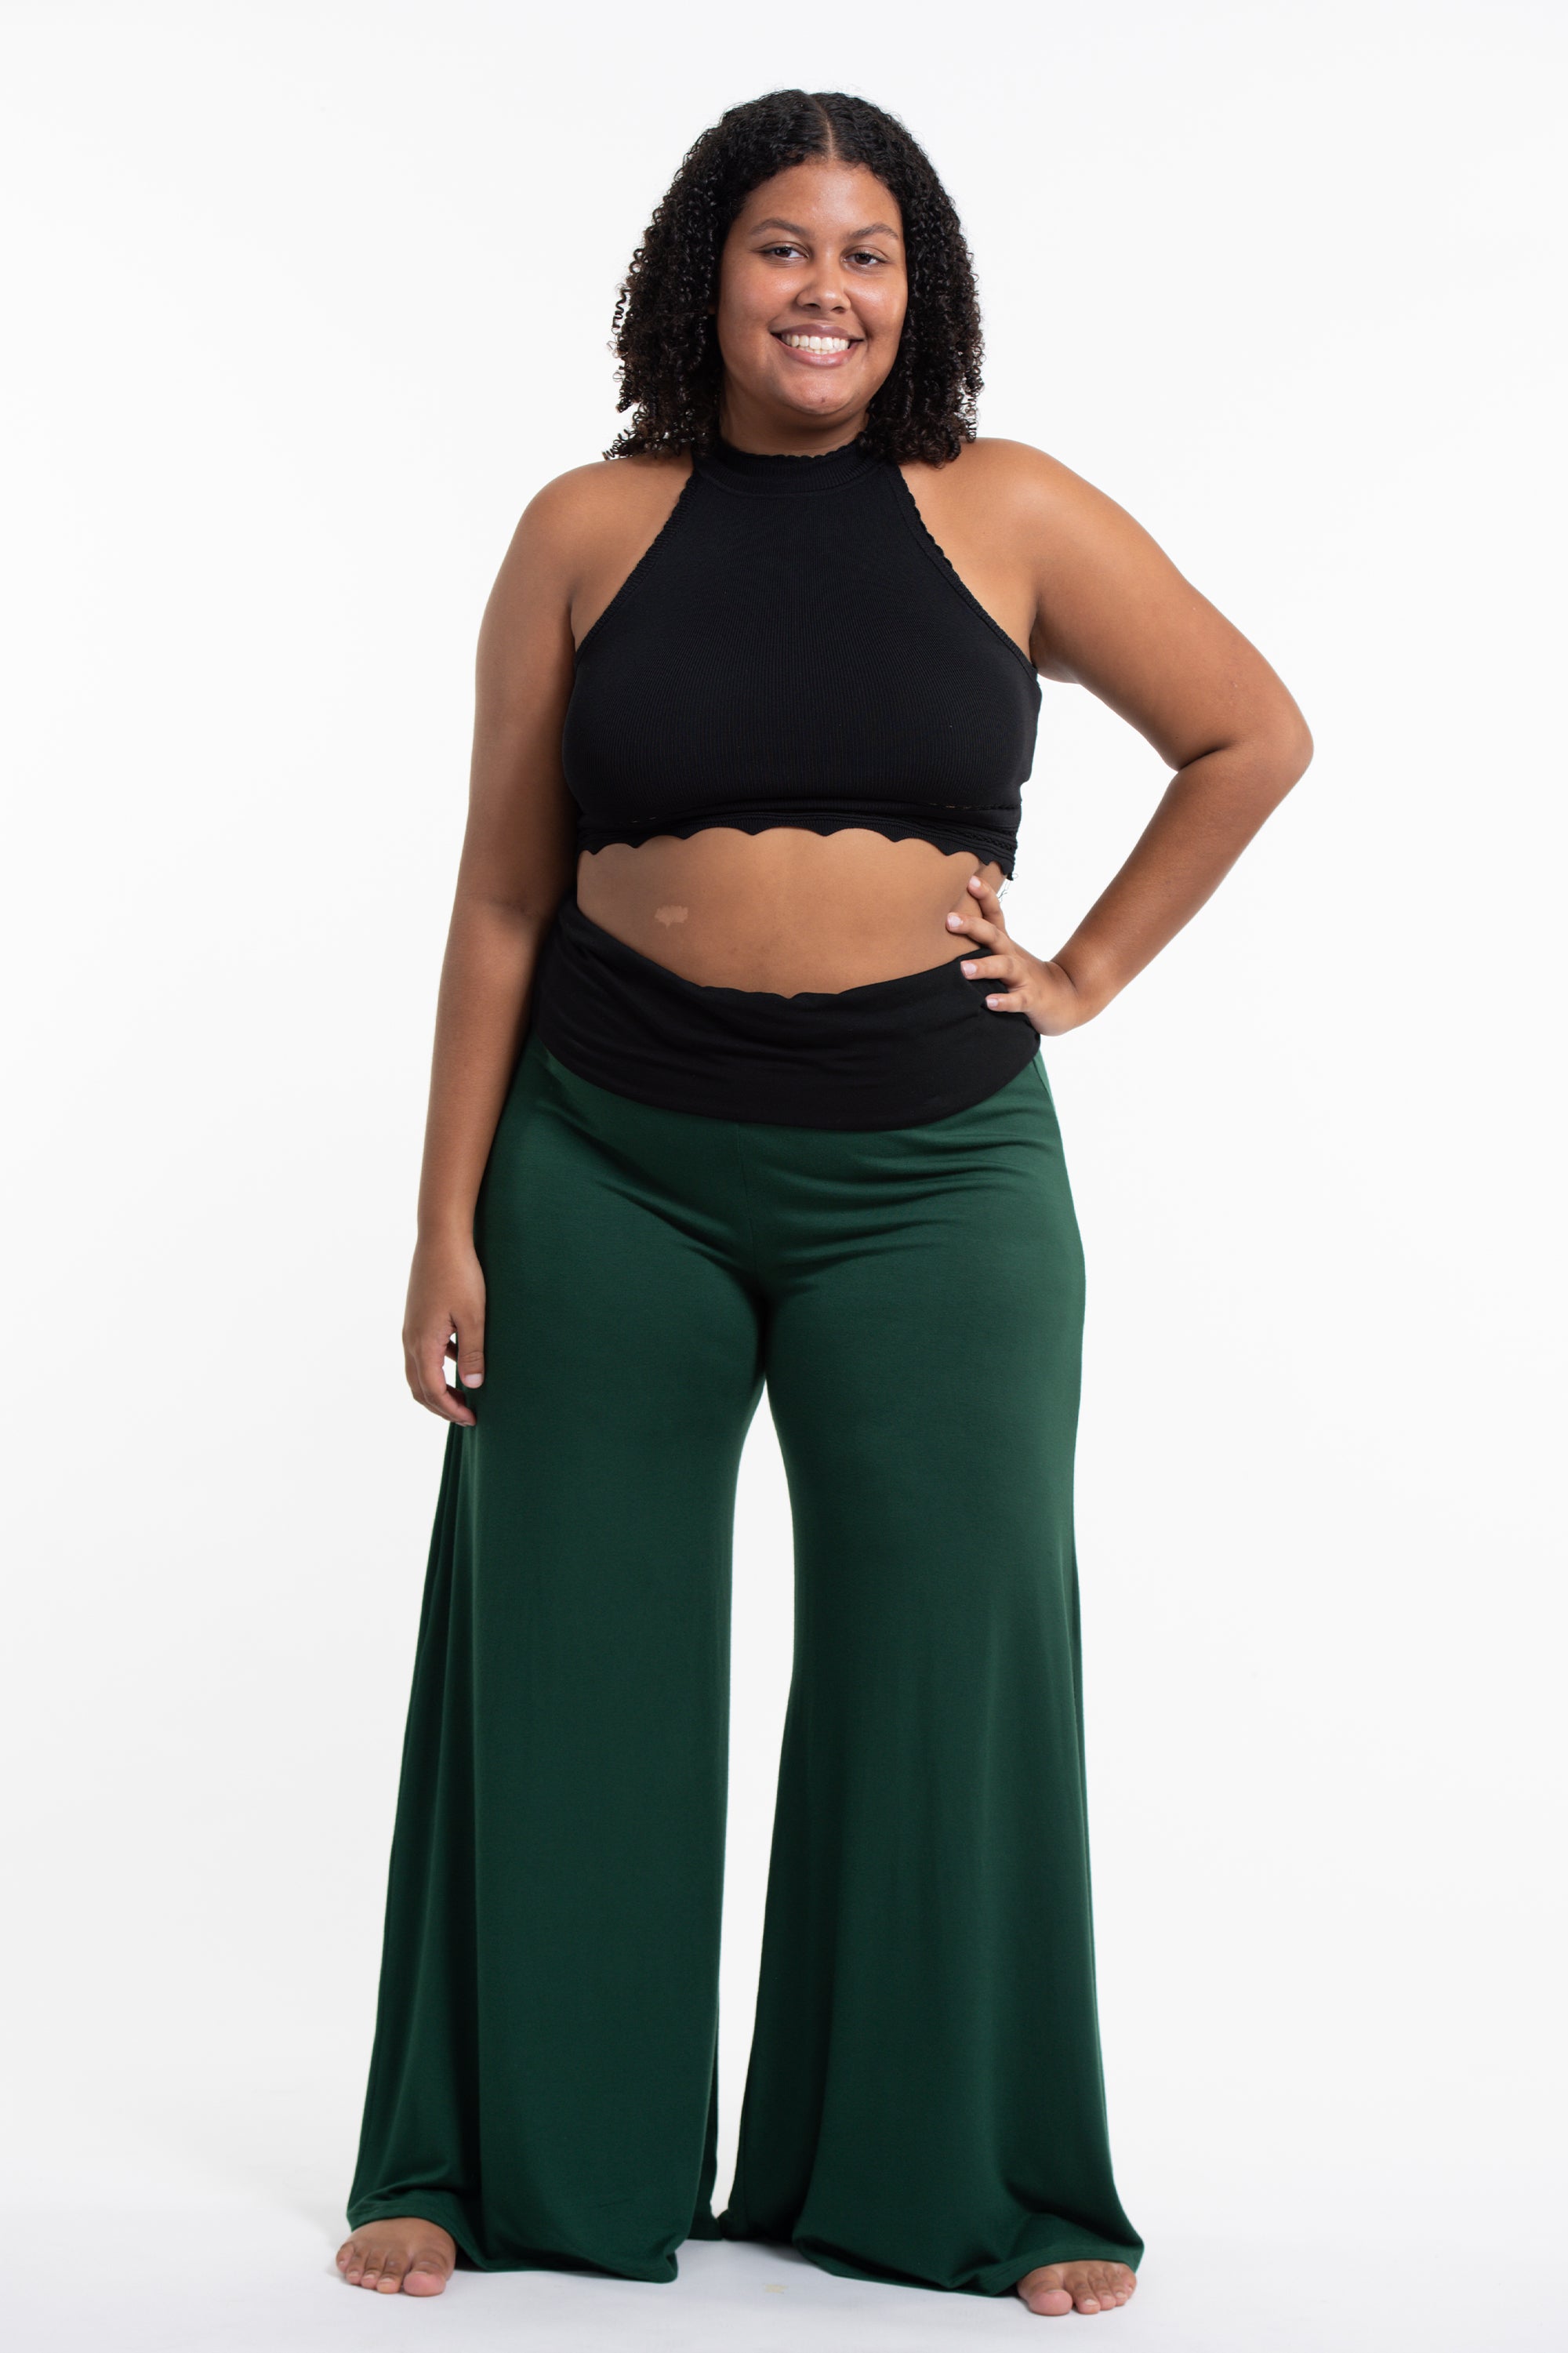 Leo Olive Green Tie-Waist Cropped Pants | Wide leg pants outfit, Wide leg  cropped pants, Green wide leg pants outfit